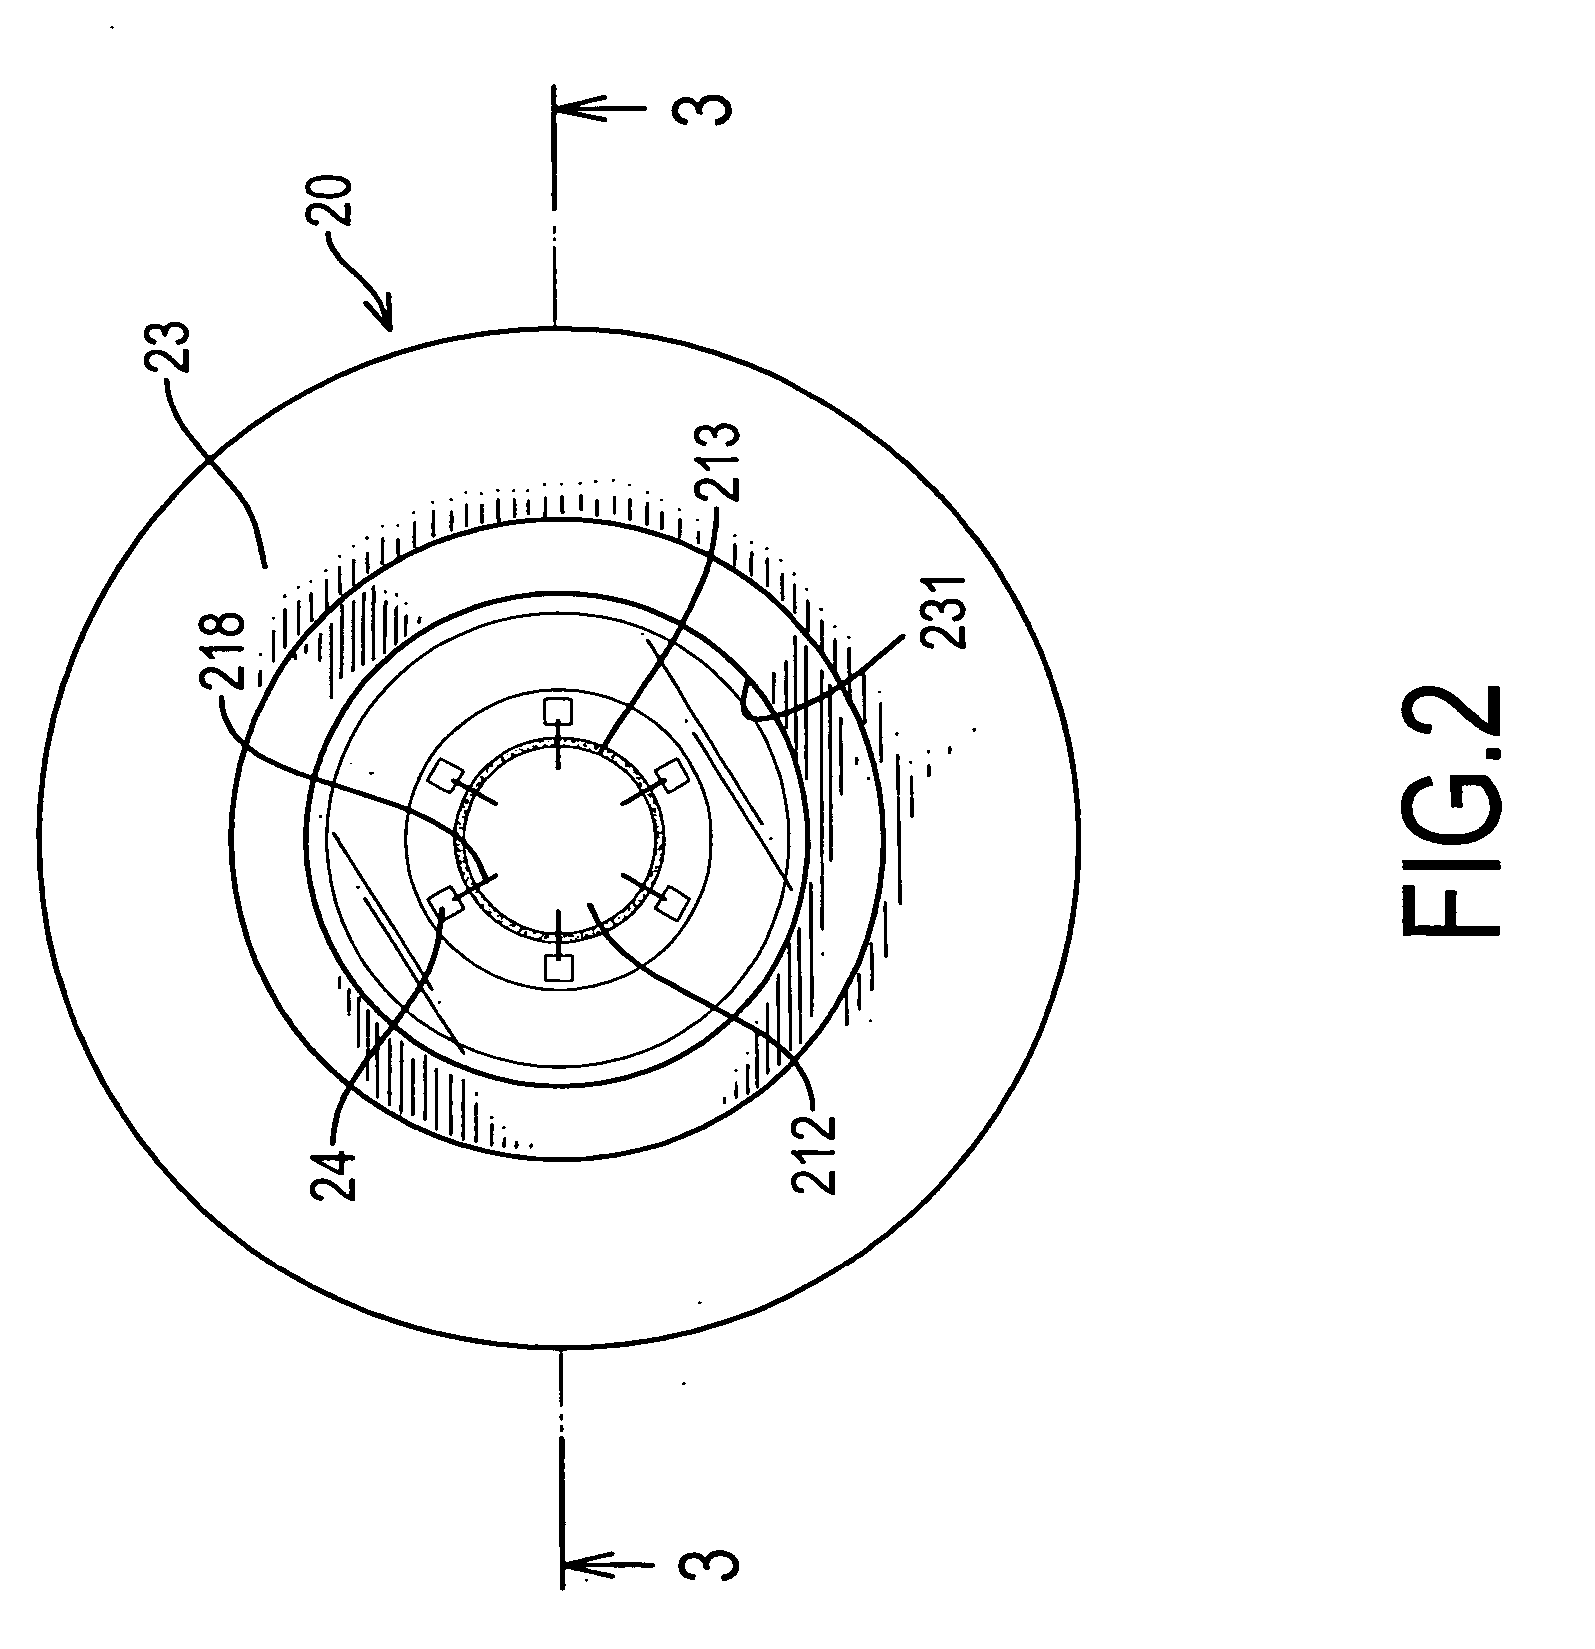 High brightness LED apparatus with an integrated heat sink